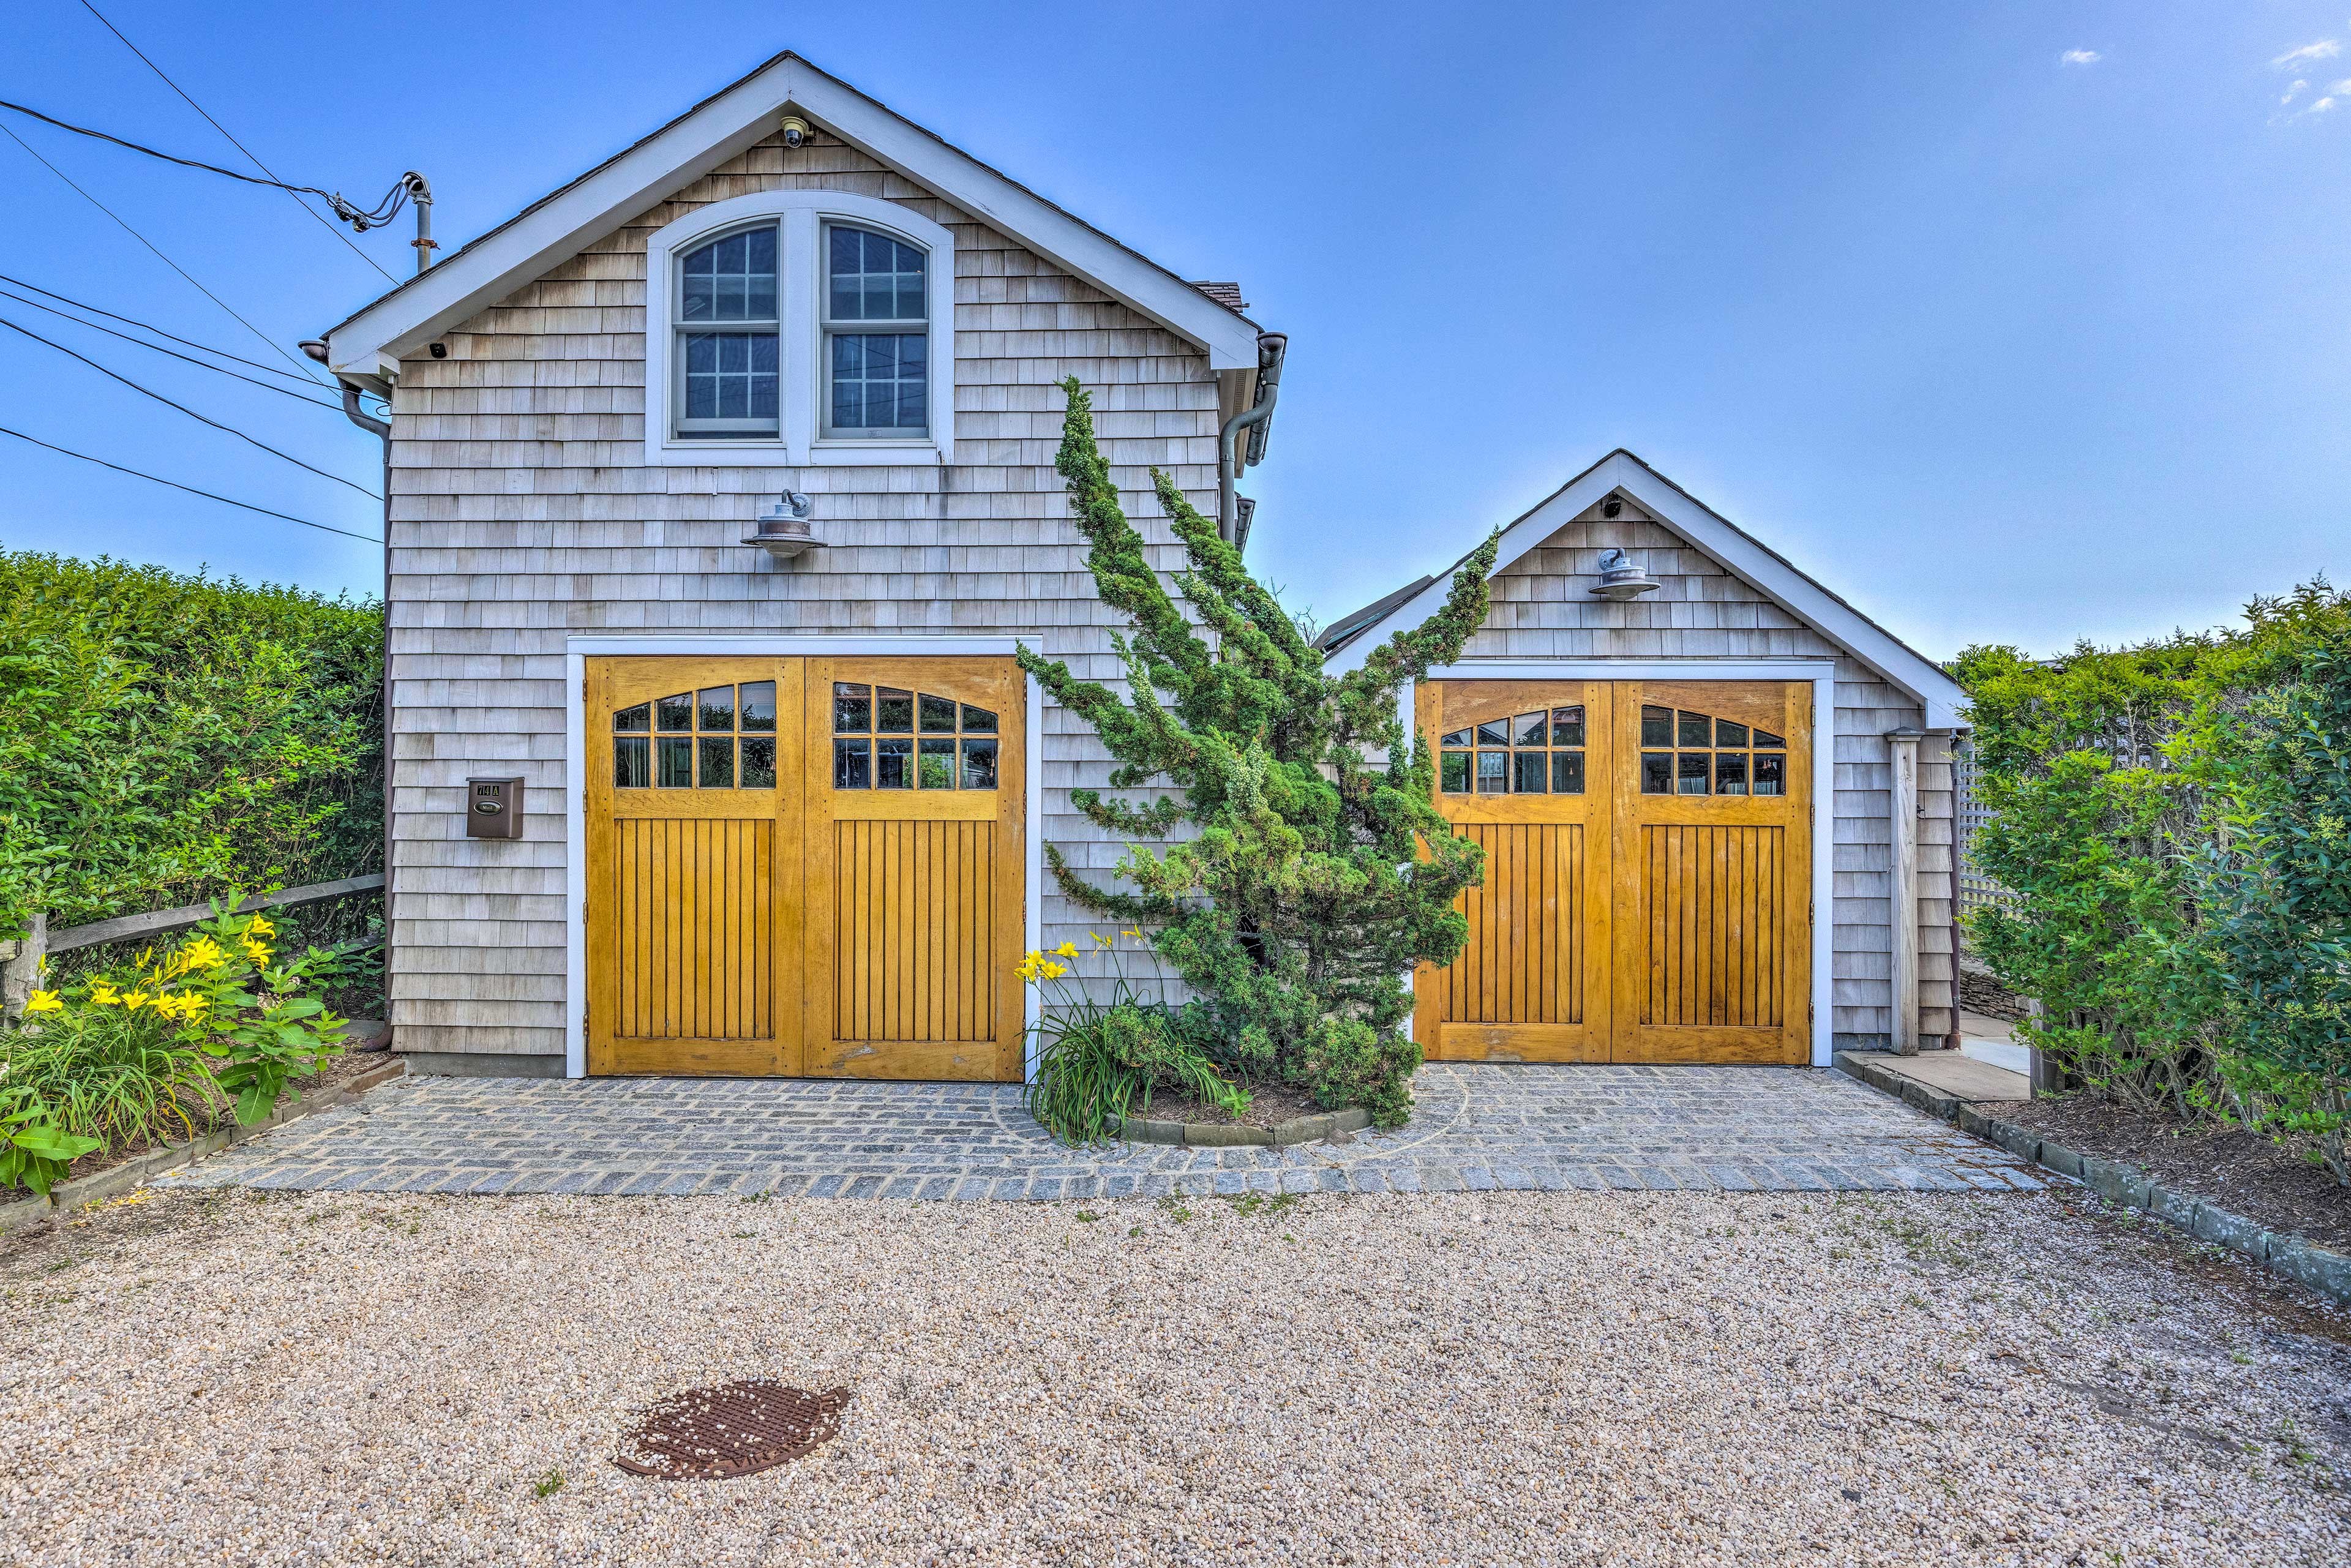 Quogue Vacation Rental Condo | 1BR | 1.5BA | 2 Stories | Stairs Required